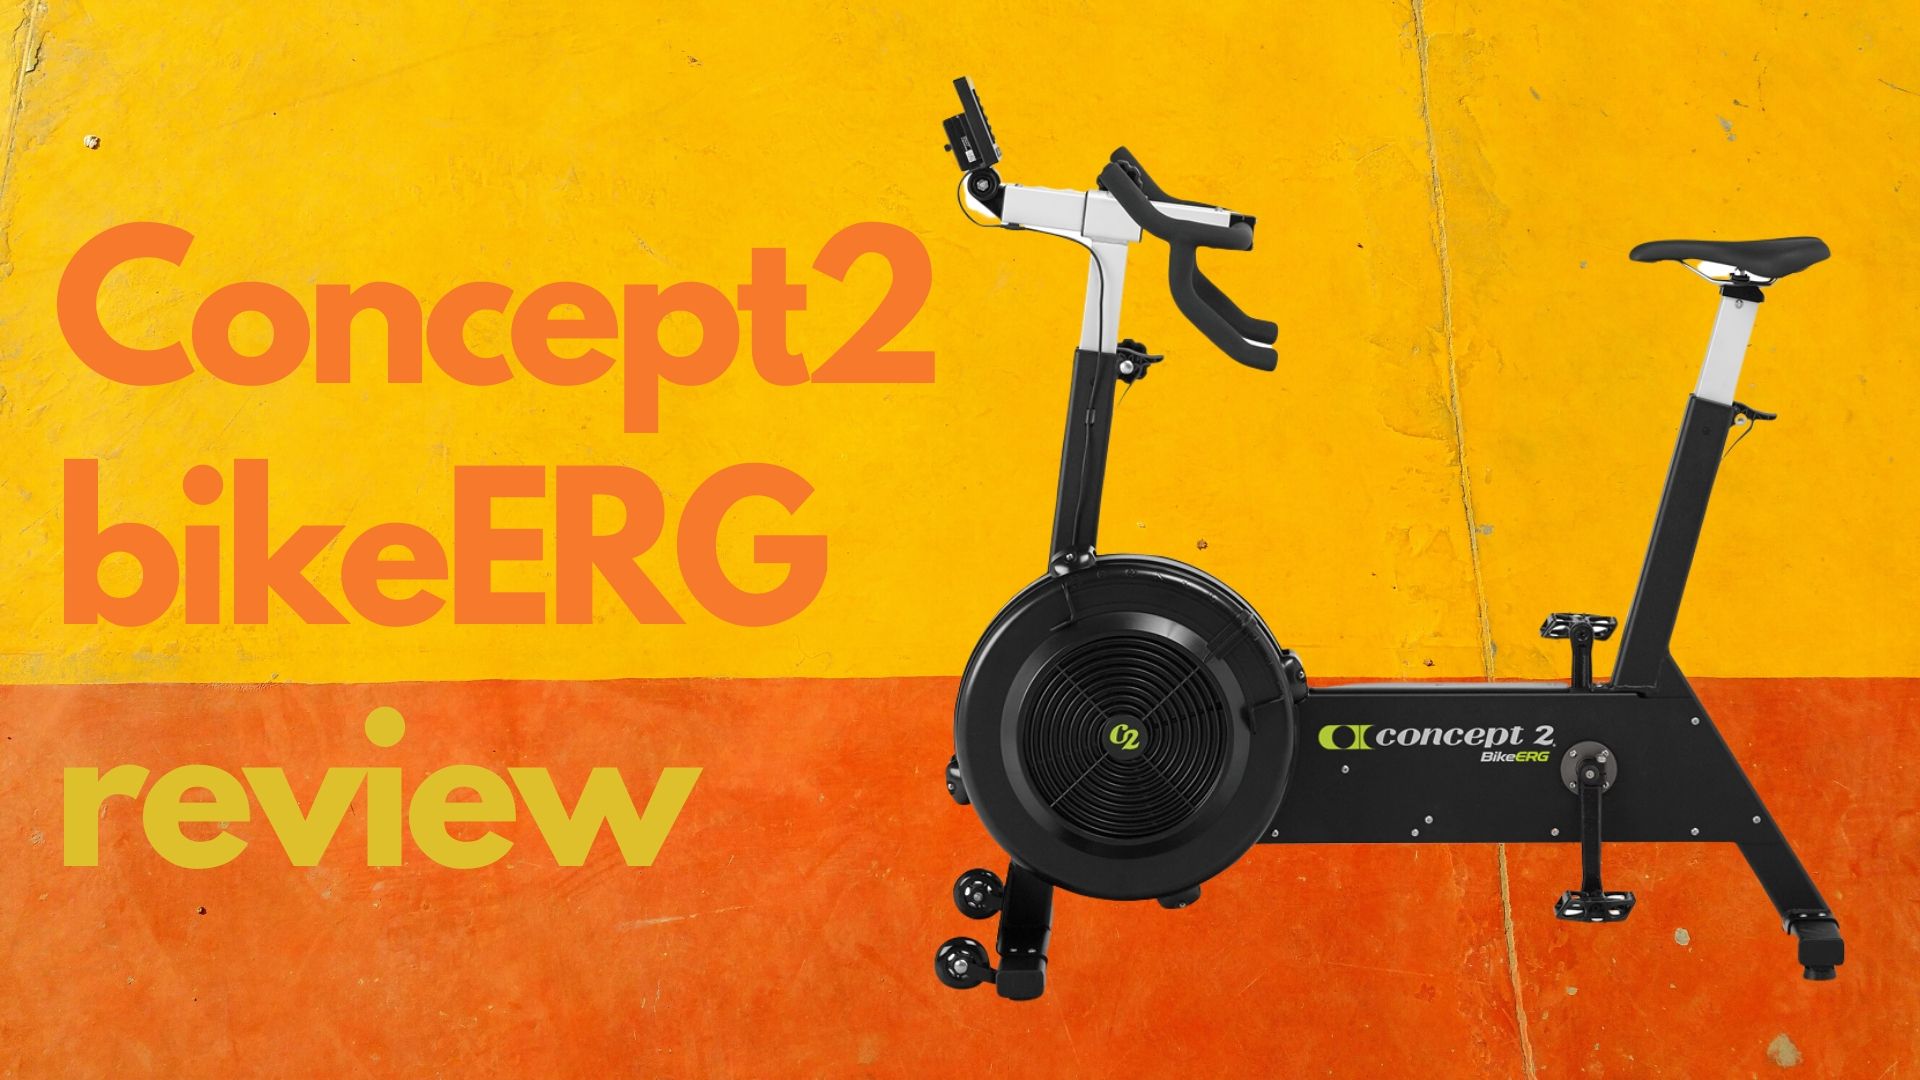 Concept2’S BikeErg Review – The Kickass Gym Bike For Every Triathlete